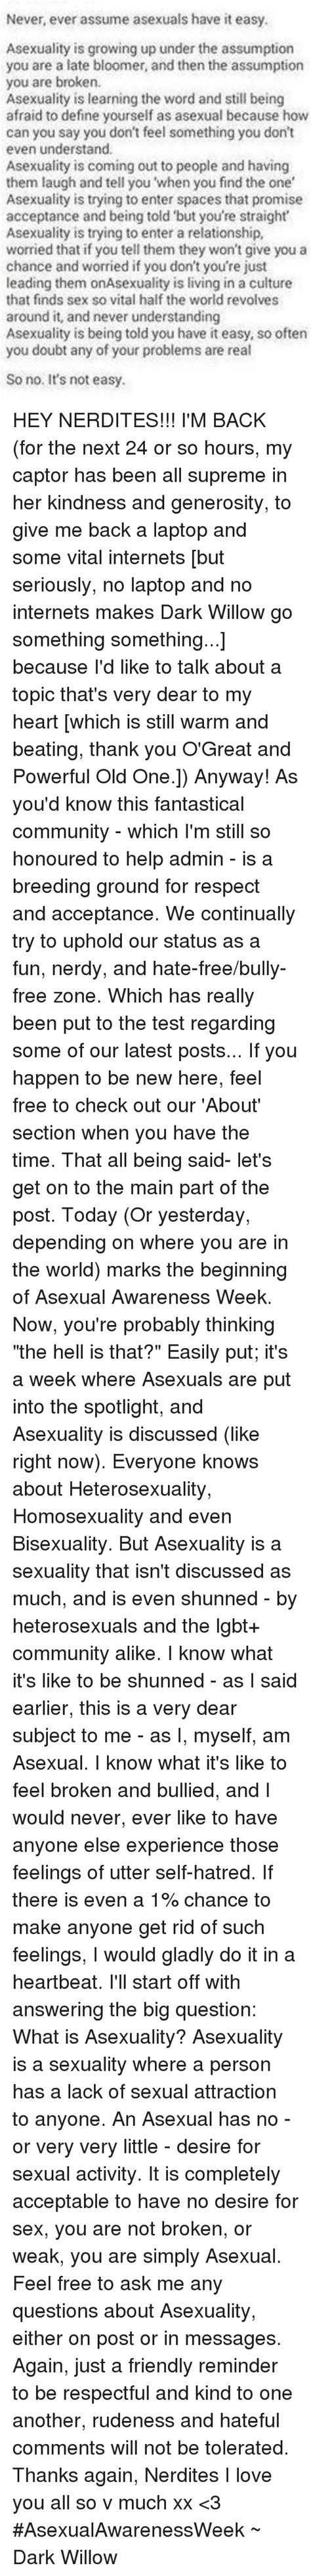 never ever assume asexuals have it easy asexuality is growing up under